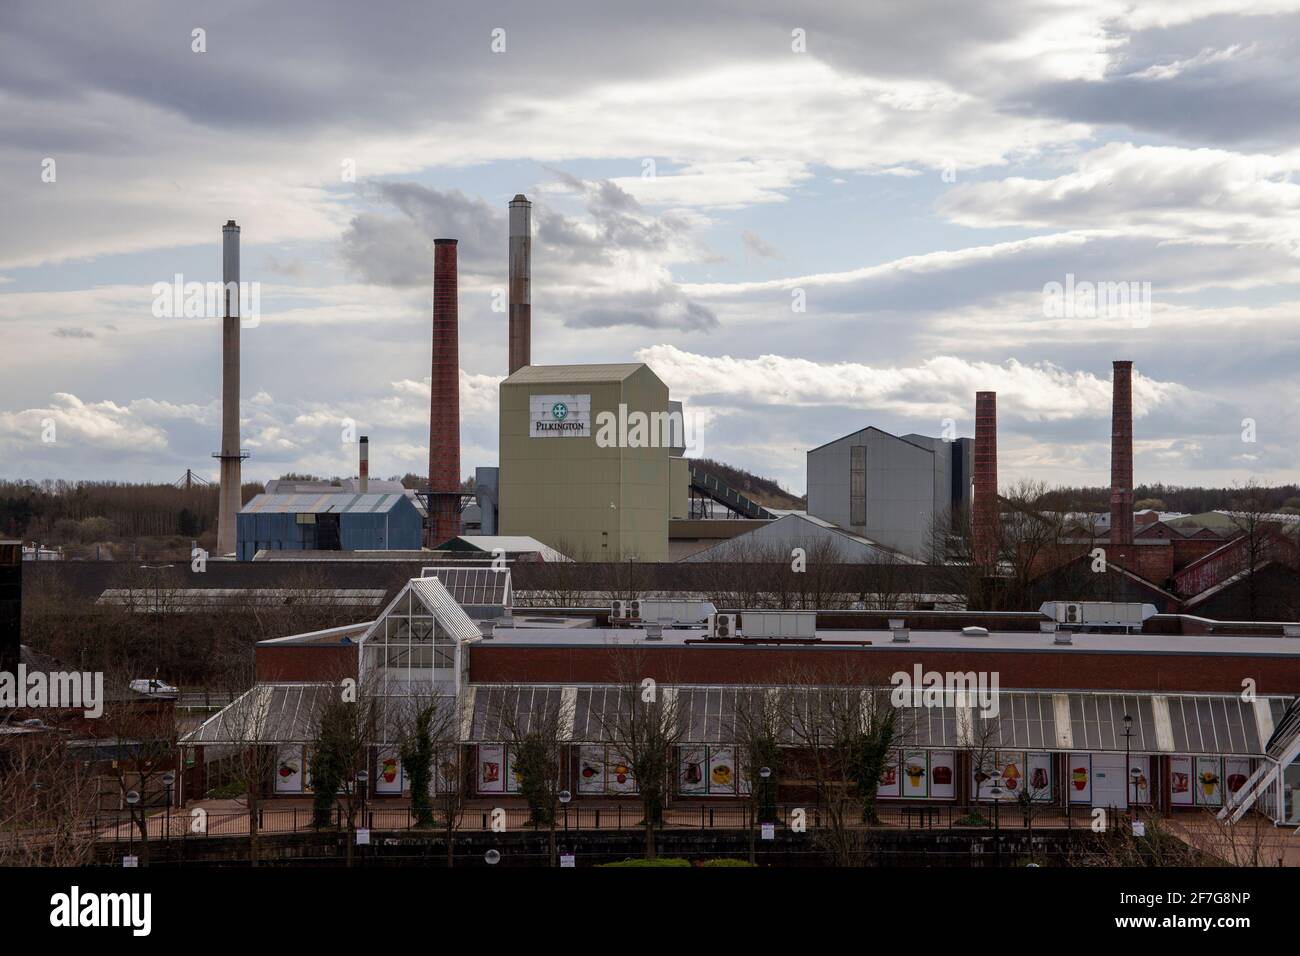 Pilkington Glass (Greengate Works) factory in St Helens, UK, with 'The Range' retailer in the foreground. Stock Photo